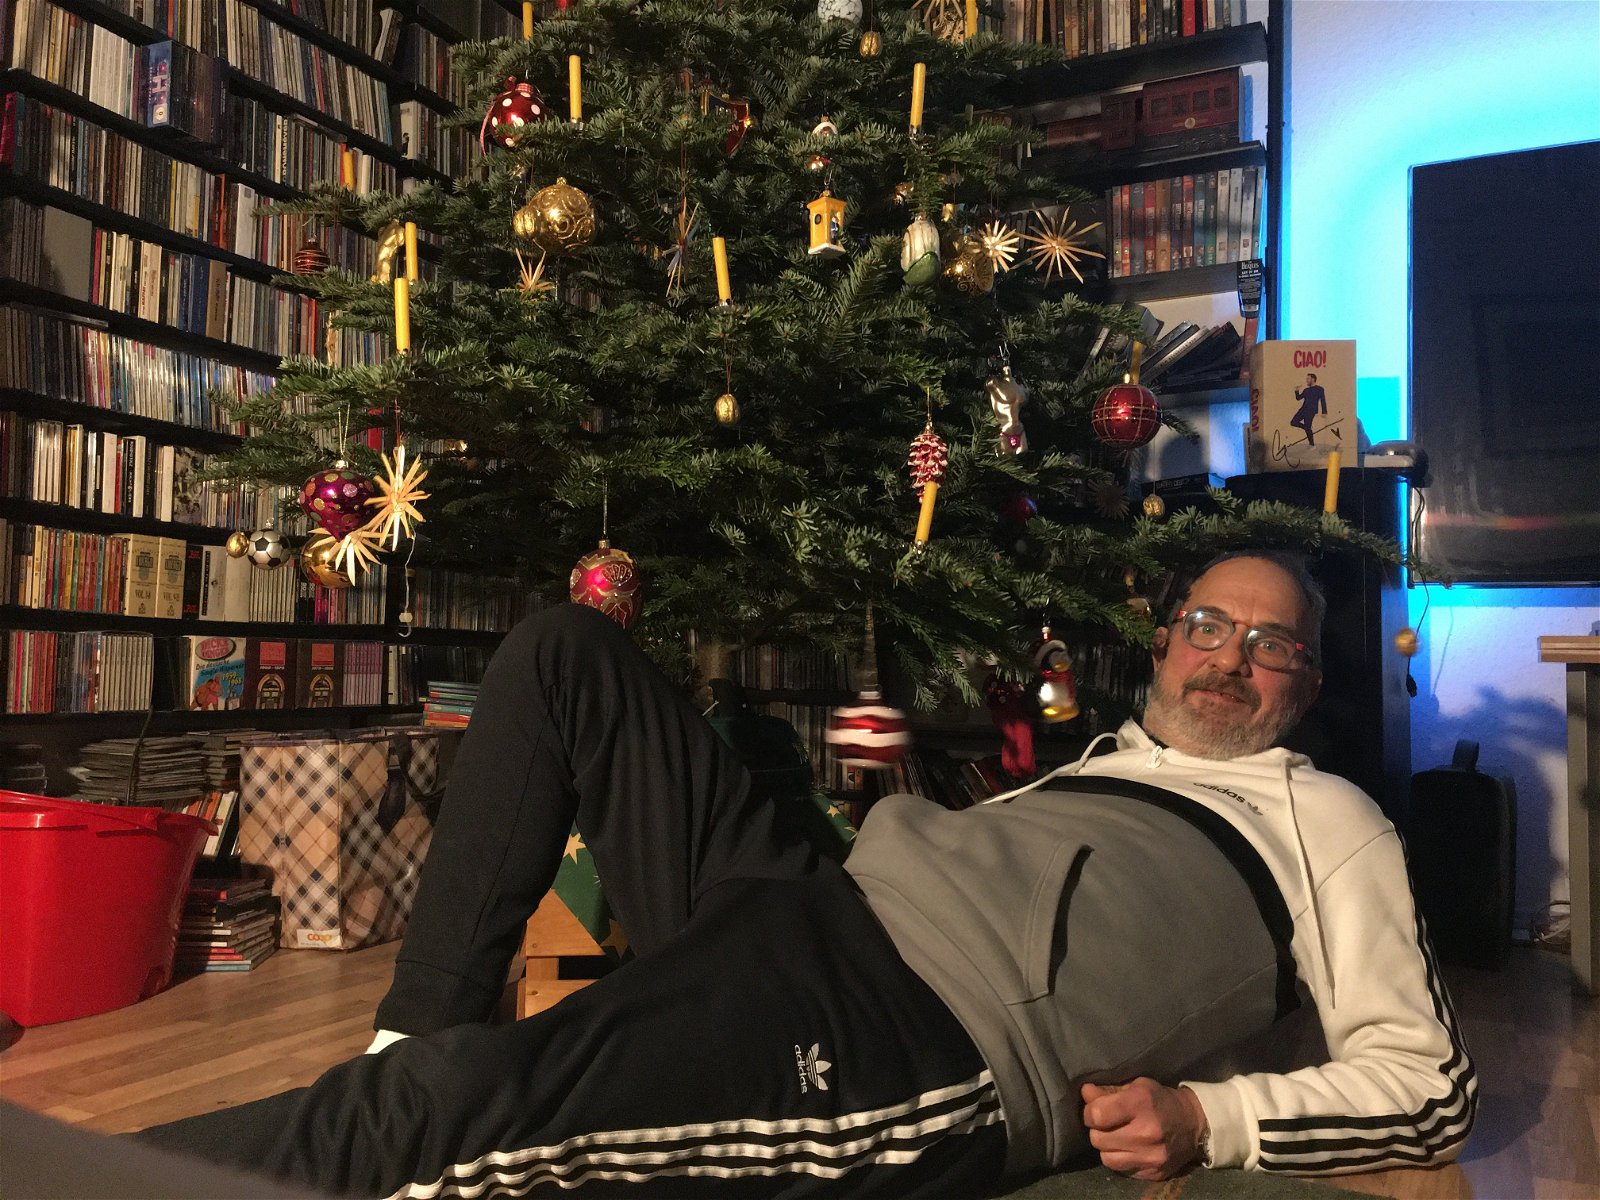 Photo by sneax6969 with the username @sneax6969, who is a verified user,  January 6, 2022 at 7:14 PM. The post is about the topic nude men in sneax and flip-flops and the text says 'me and my christmastree'